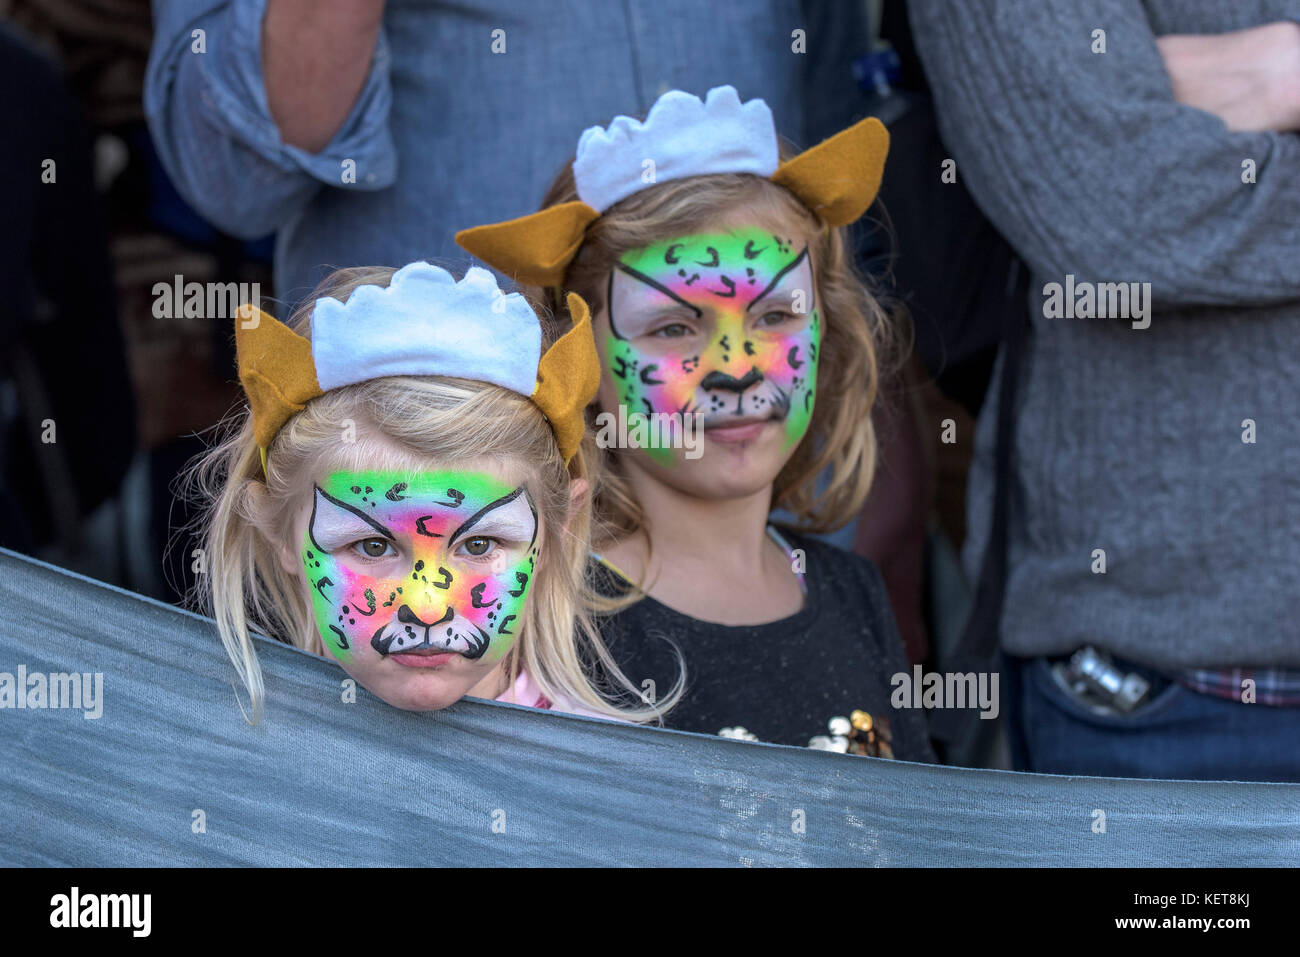 Face painting - two children with their faces painted. Stock Photo